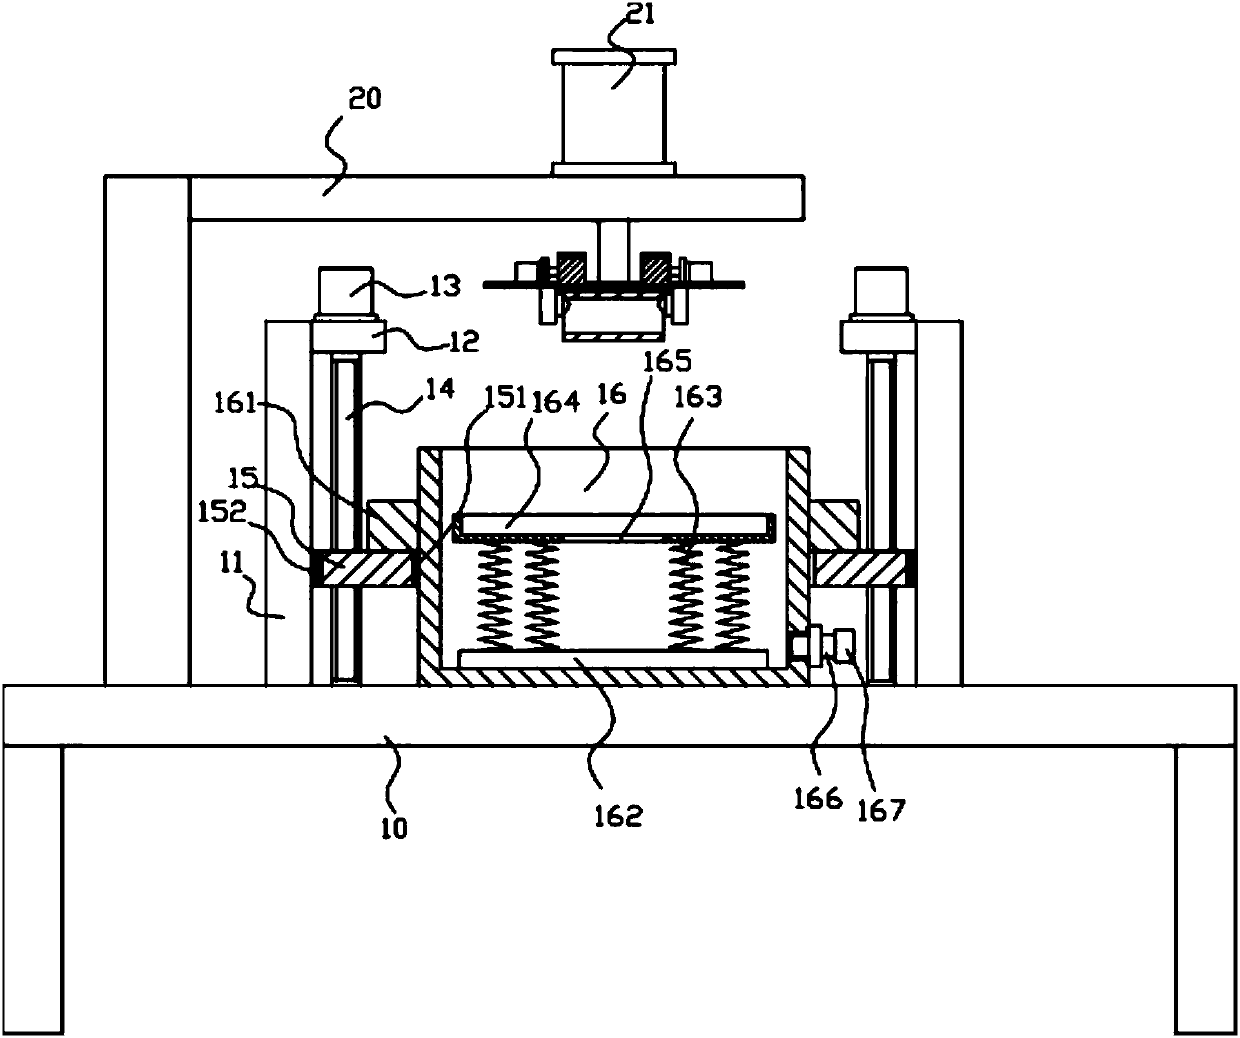 An automatic oil immersion mechanism for cylinder sleeve hardware